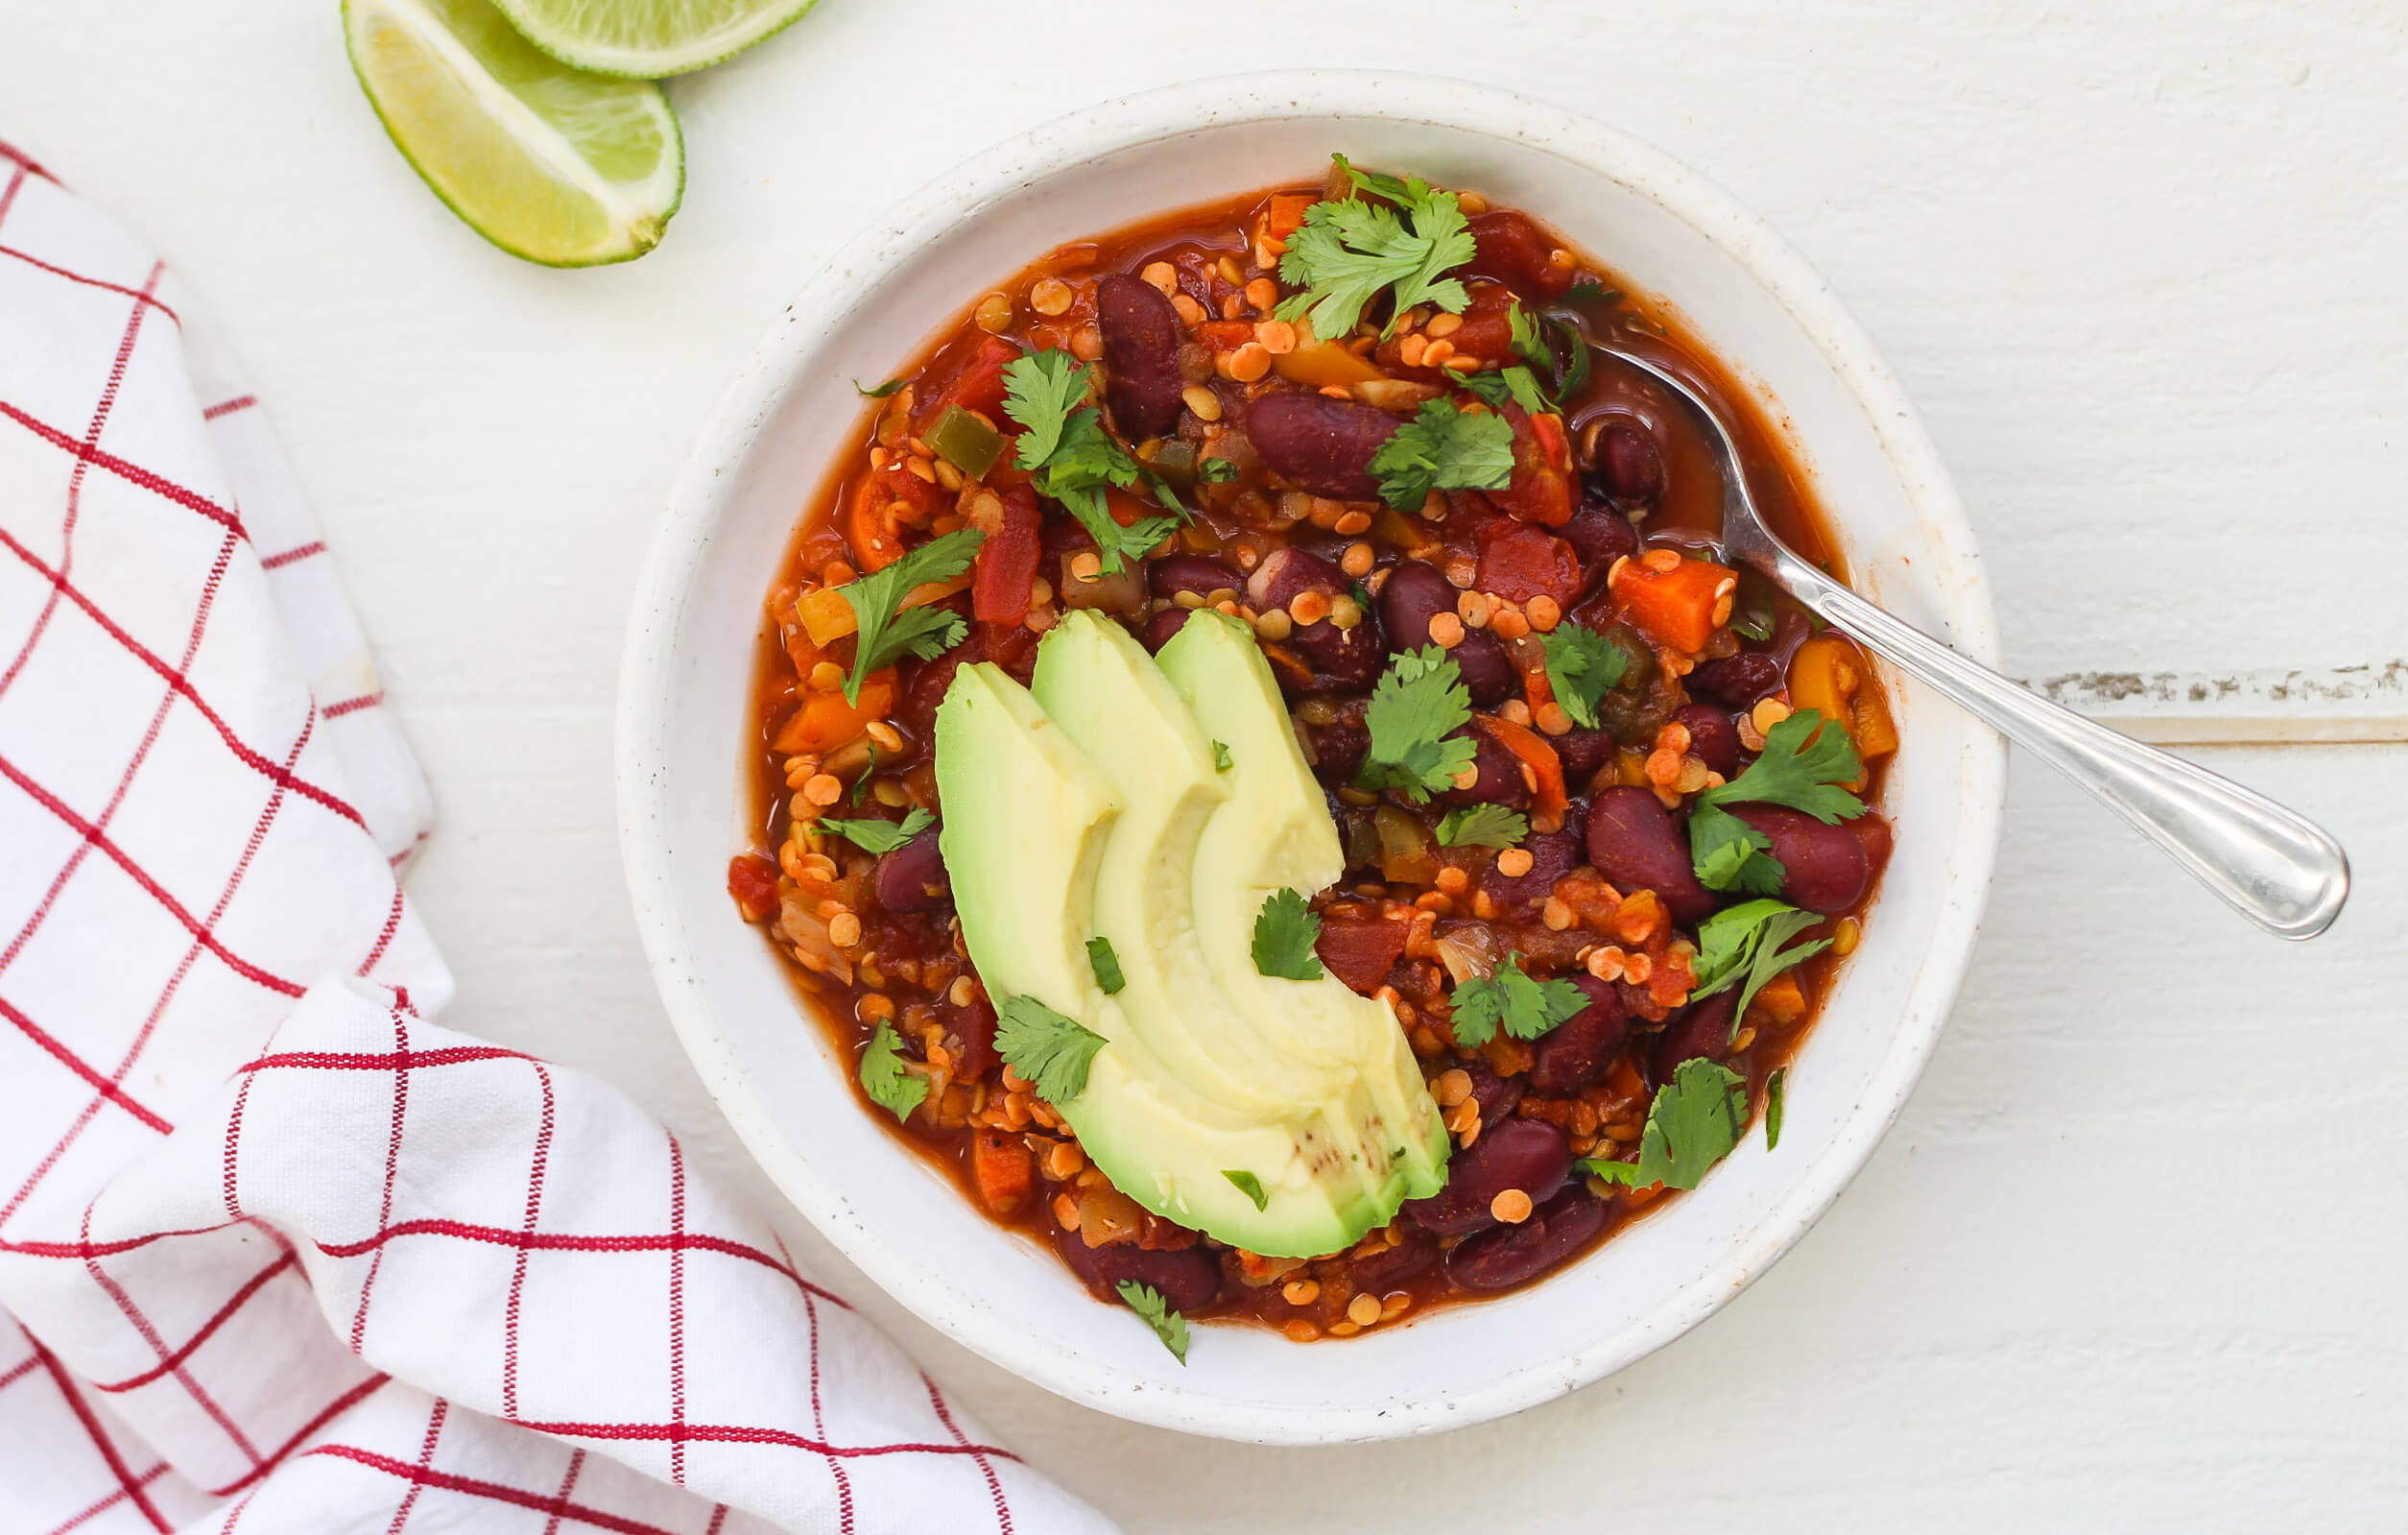 20 Healthy Meals to Help Your Clients Eat Healthy on a Tight Budget: Slow Cooker Lentil Chili